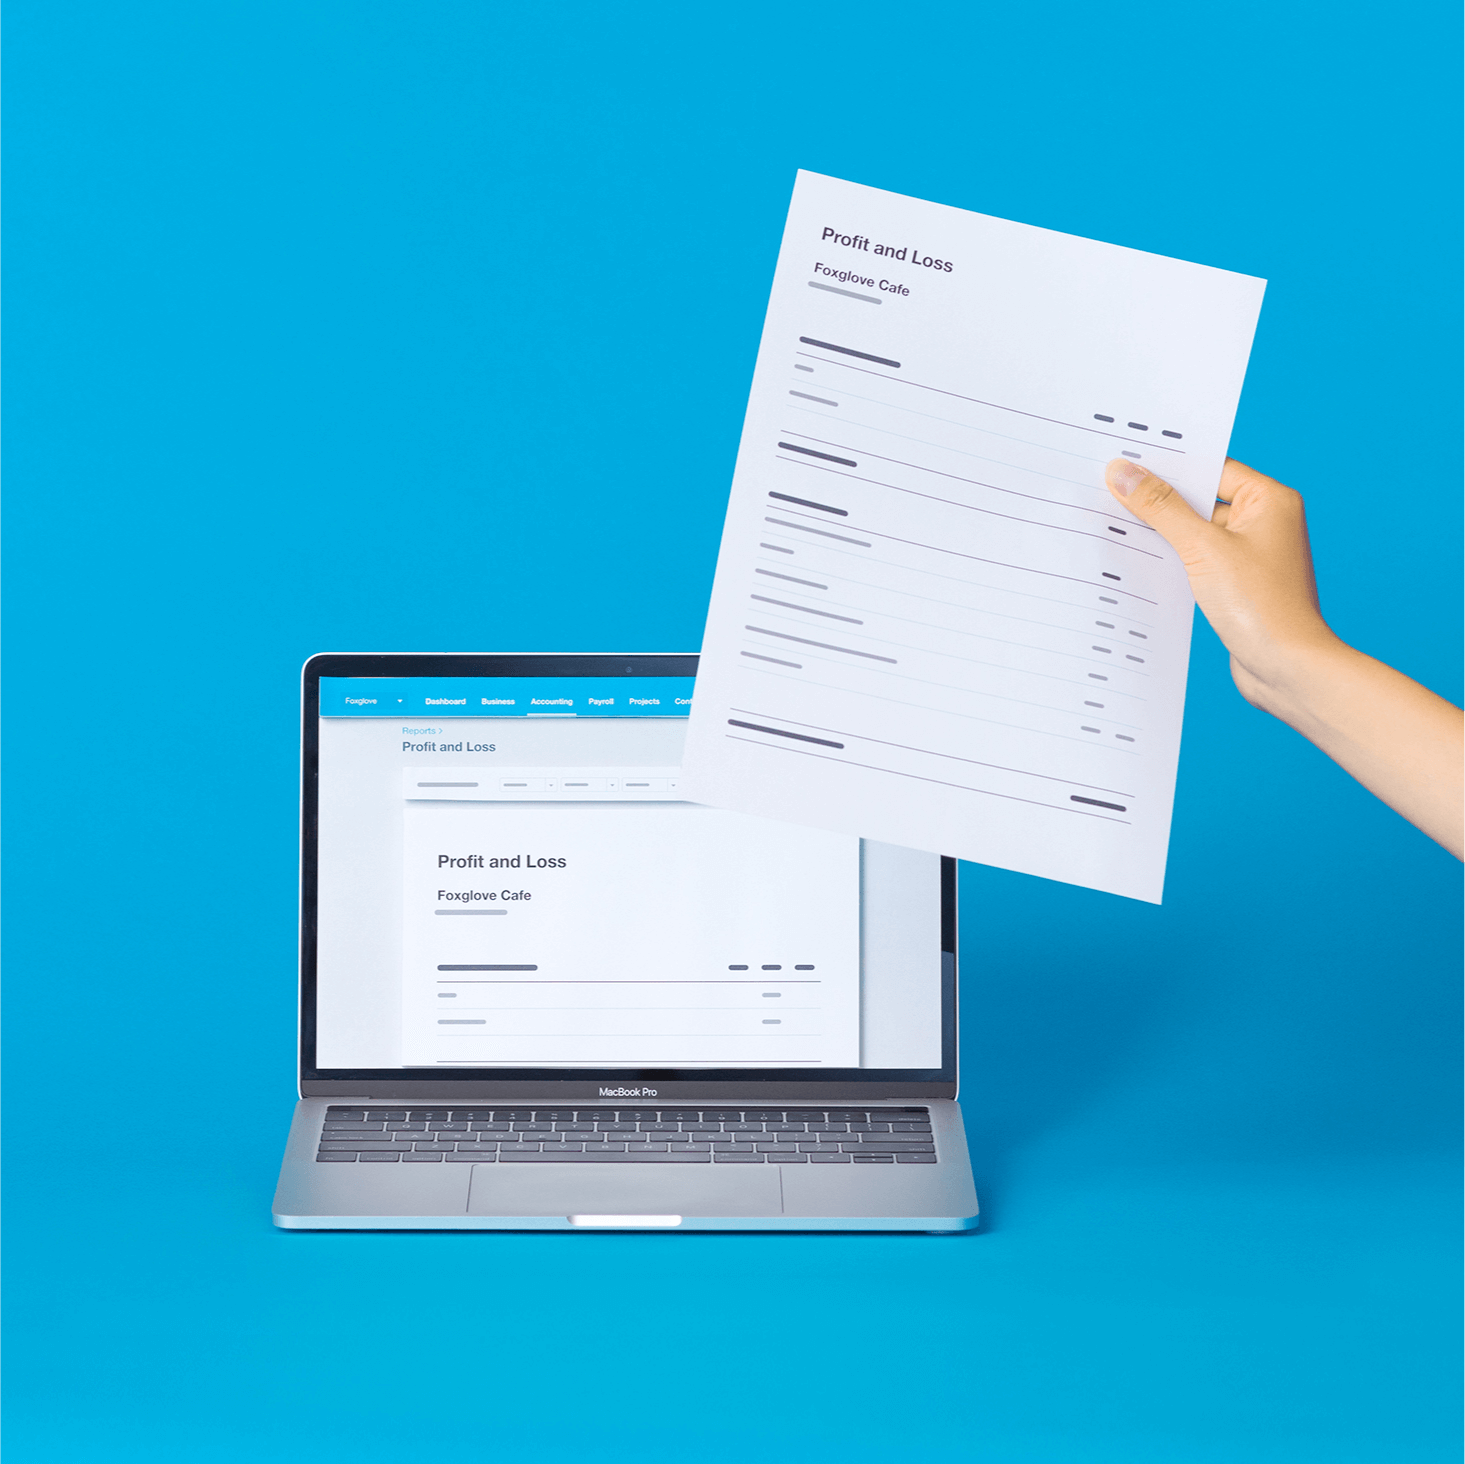 A manufacturer displays and prints a profit and loss report in their Xero accounting system.